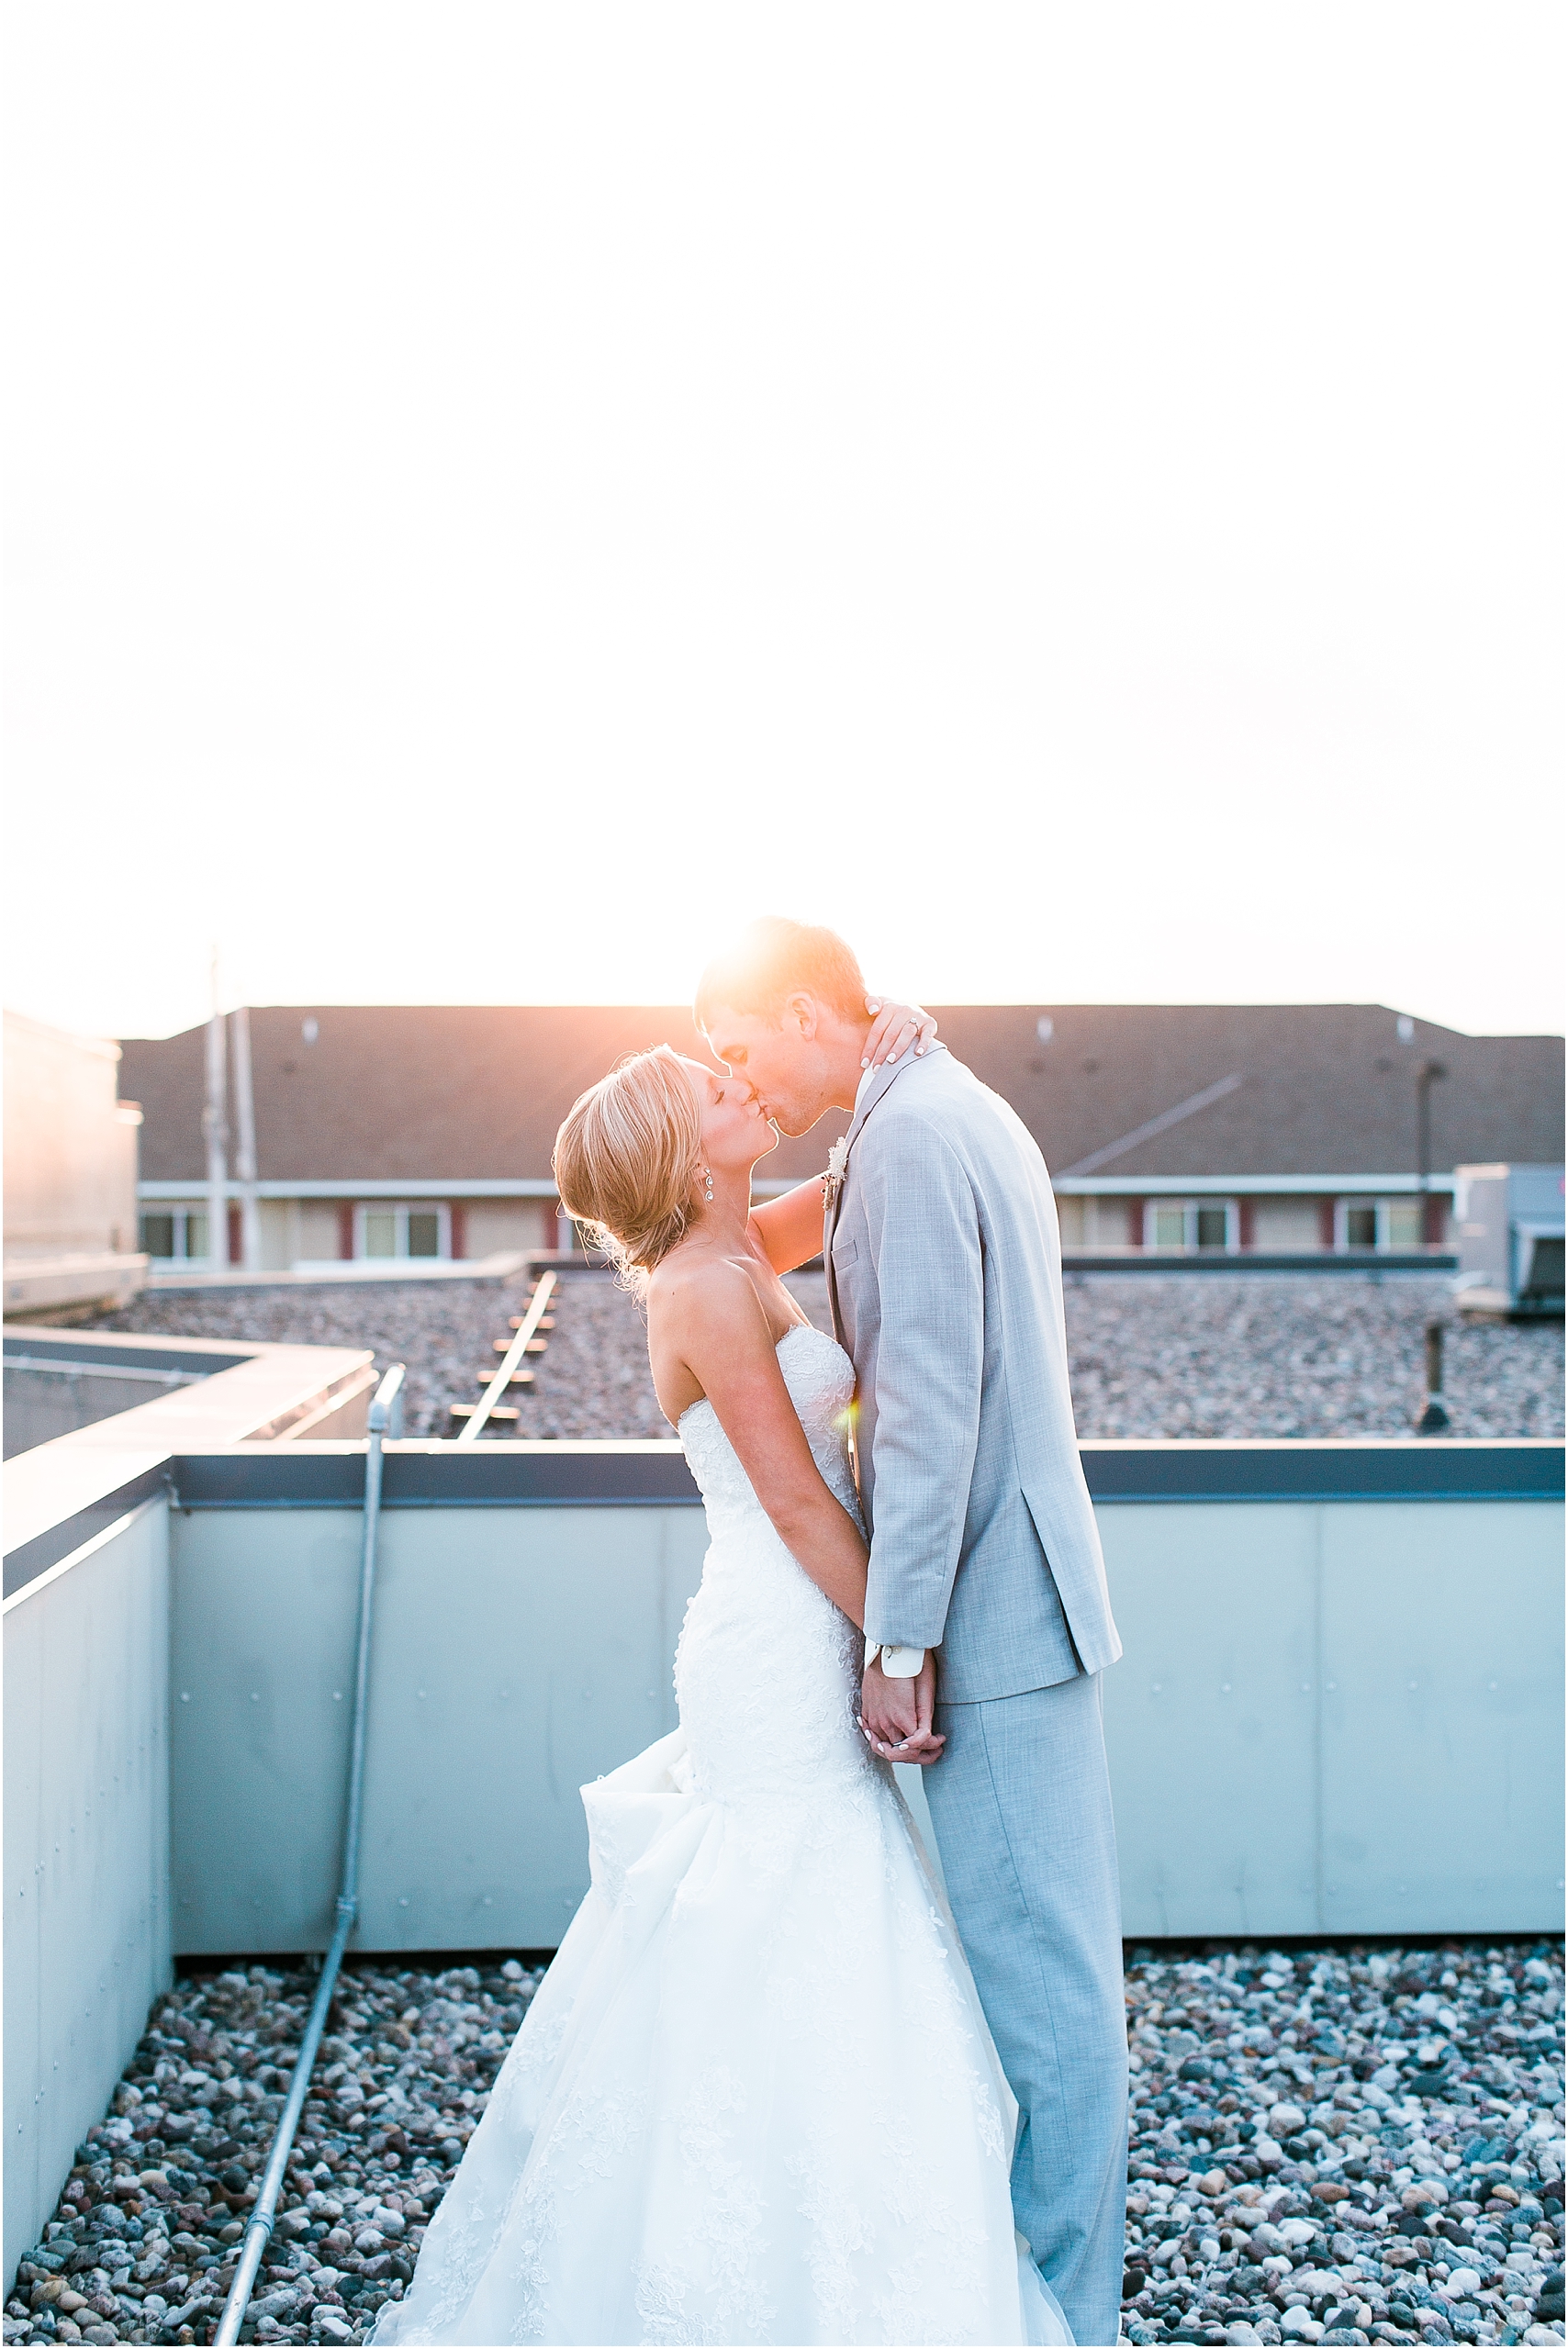 Bride and groom sunset rooftop portrait outside at Minnesota summer wedding in Buffalo MN photographed by Mallory Kiesow, Minnesota wedding photographer